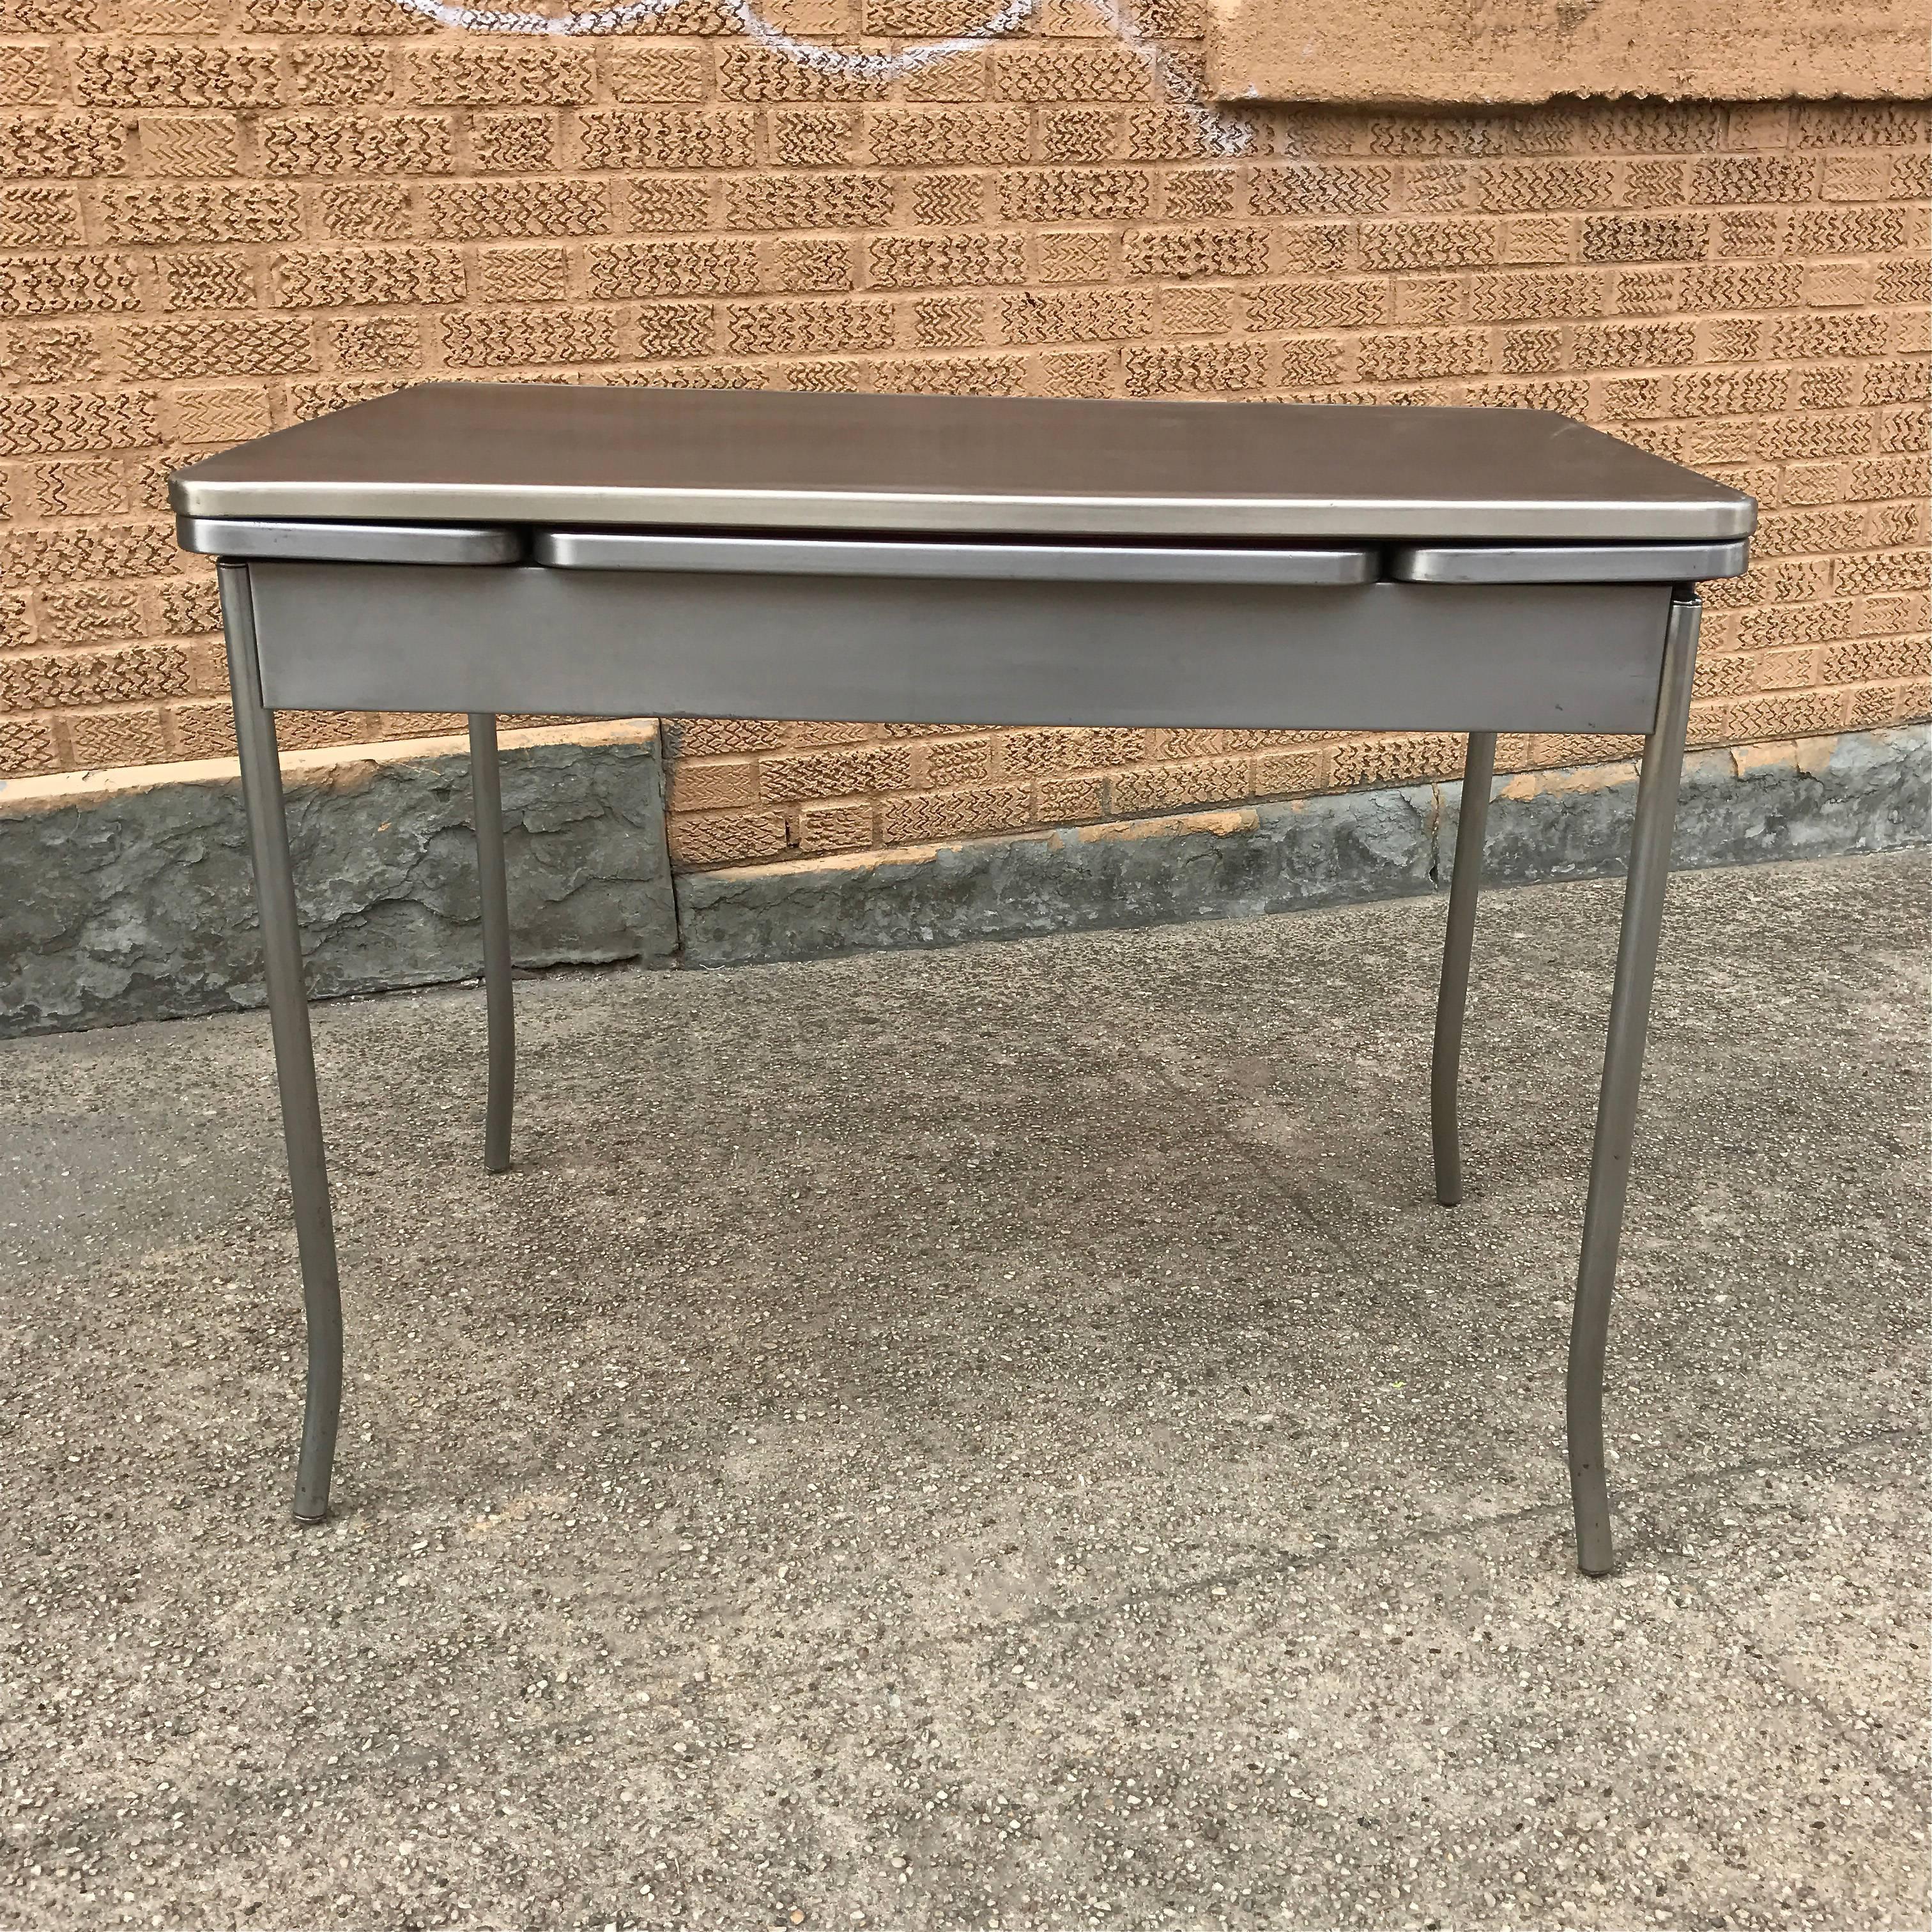 Industrial, 1940s, brushed steel, dining table extends from 40 inches - 58 inches with two pull-out leaves that tuck under the table.